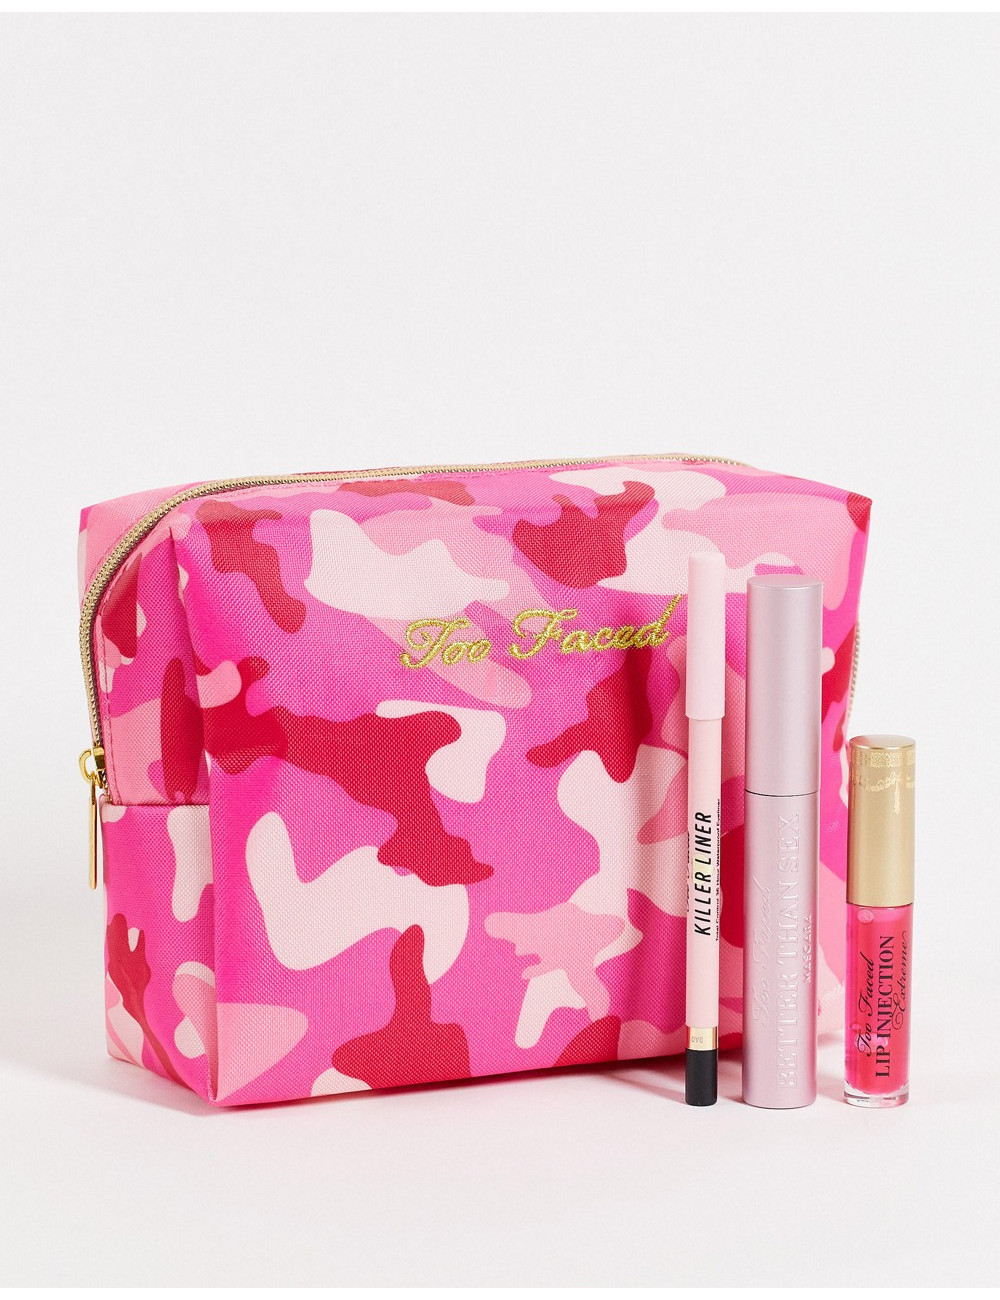 Too Faced Army of Love...